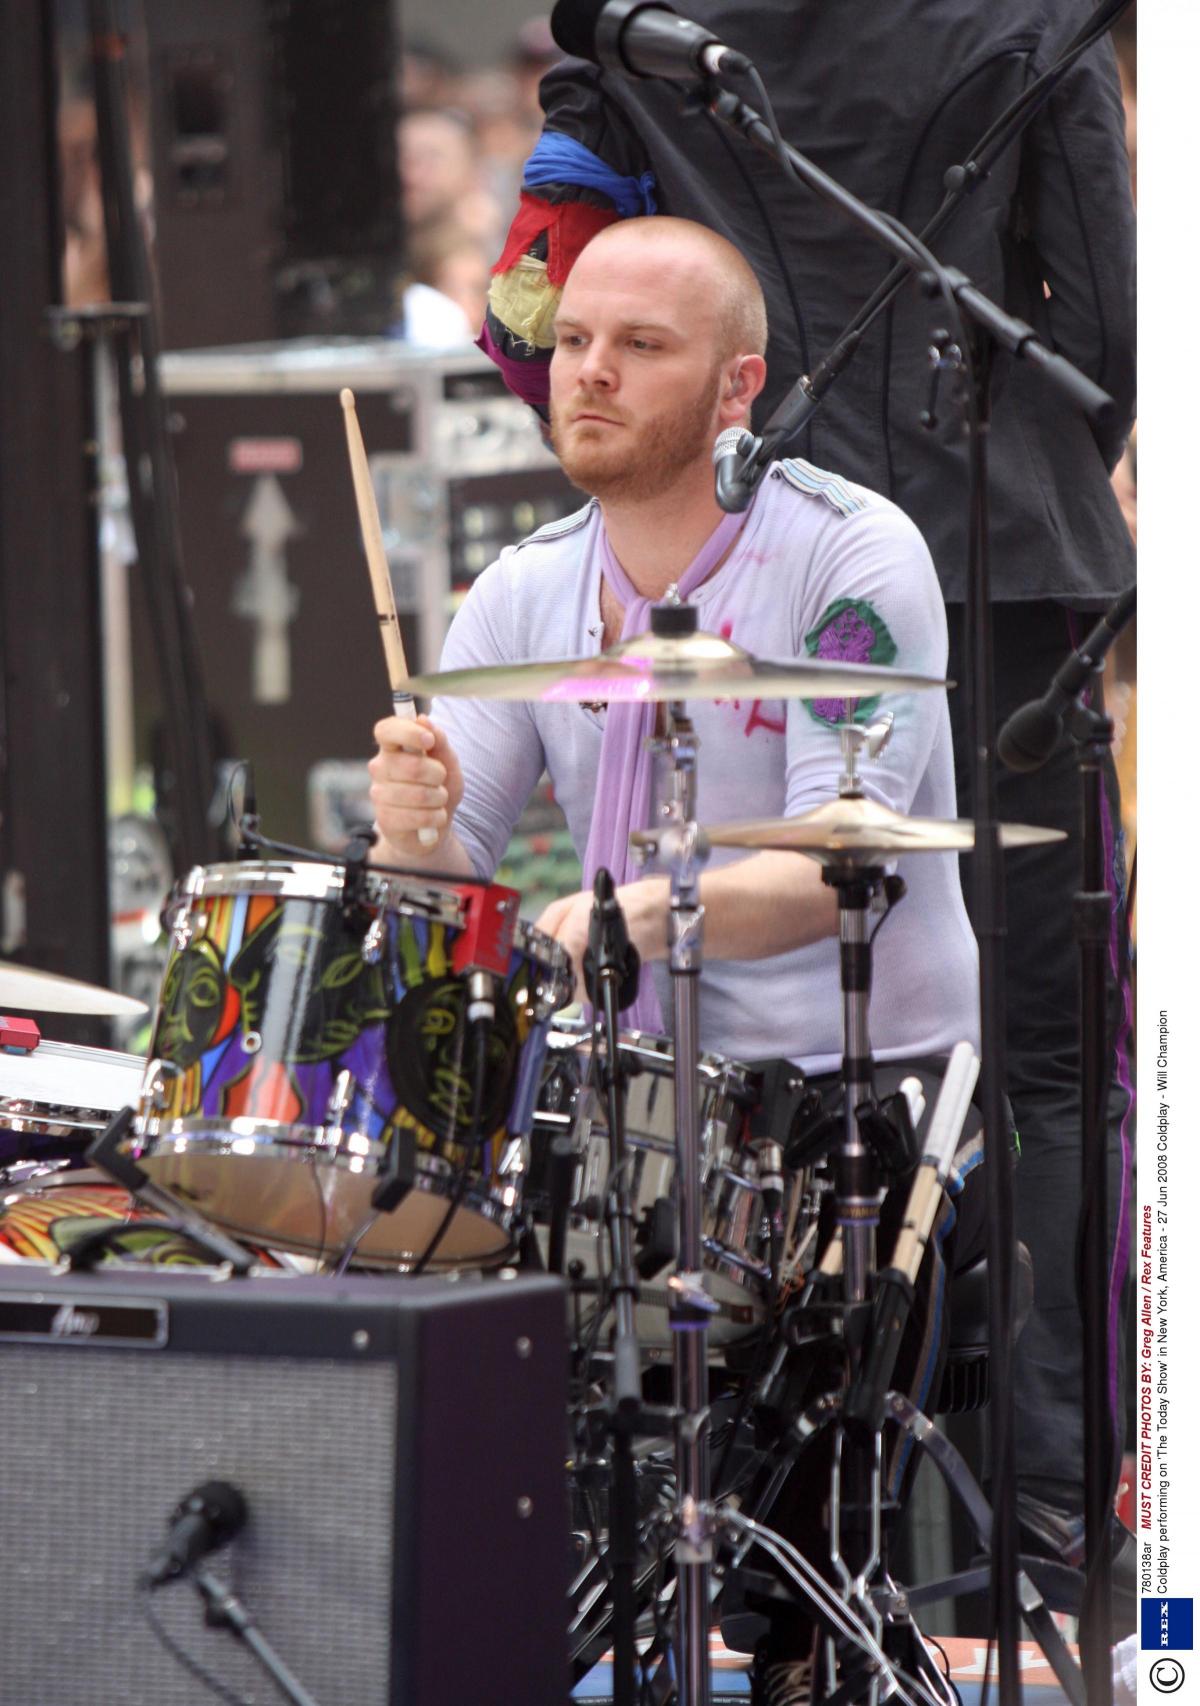 Coldplay drummer Will Champion's journey from Hampshire primary